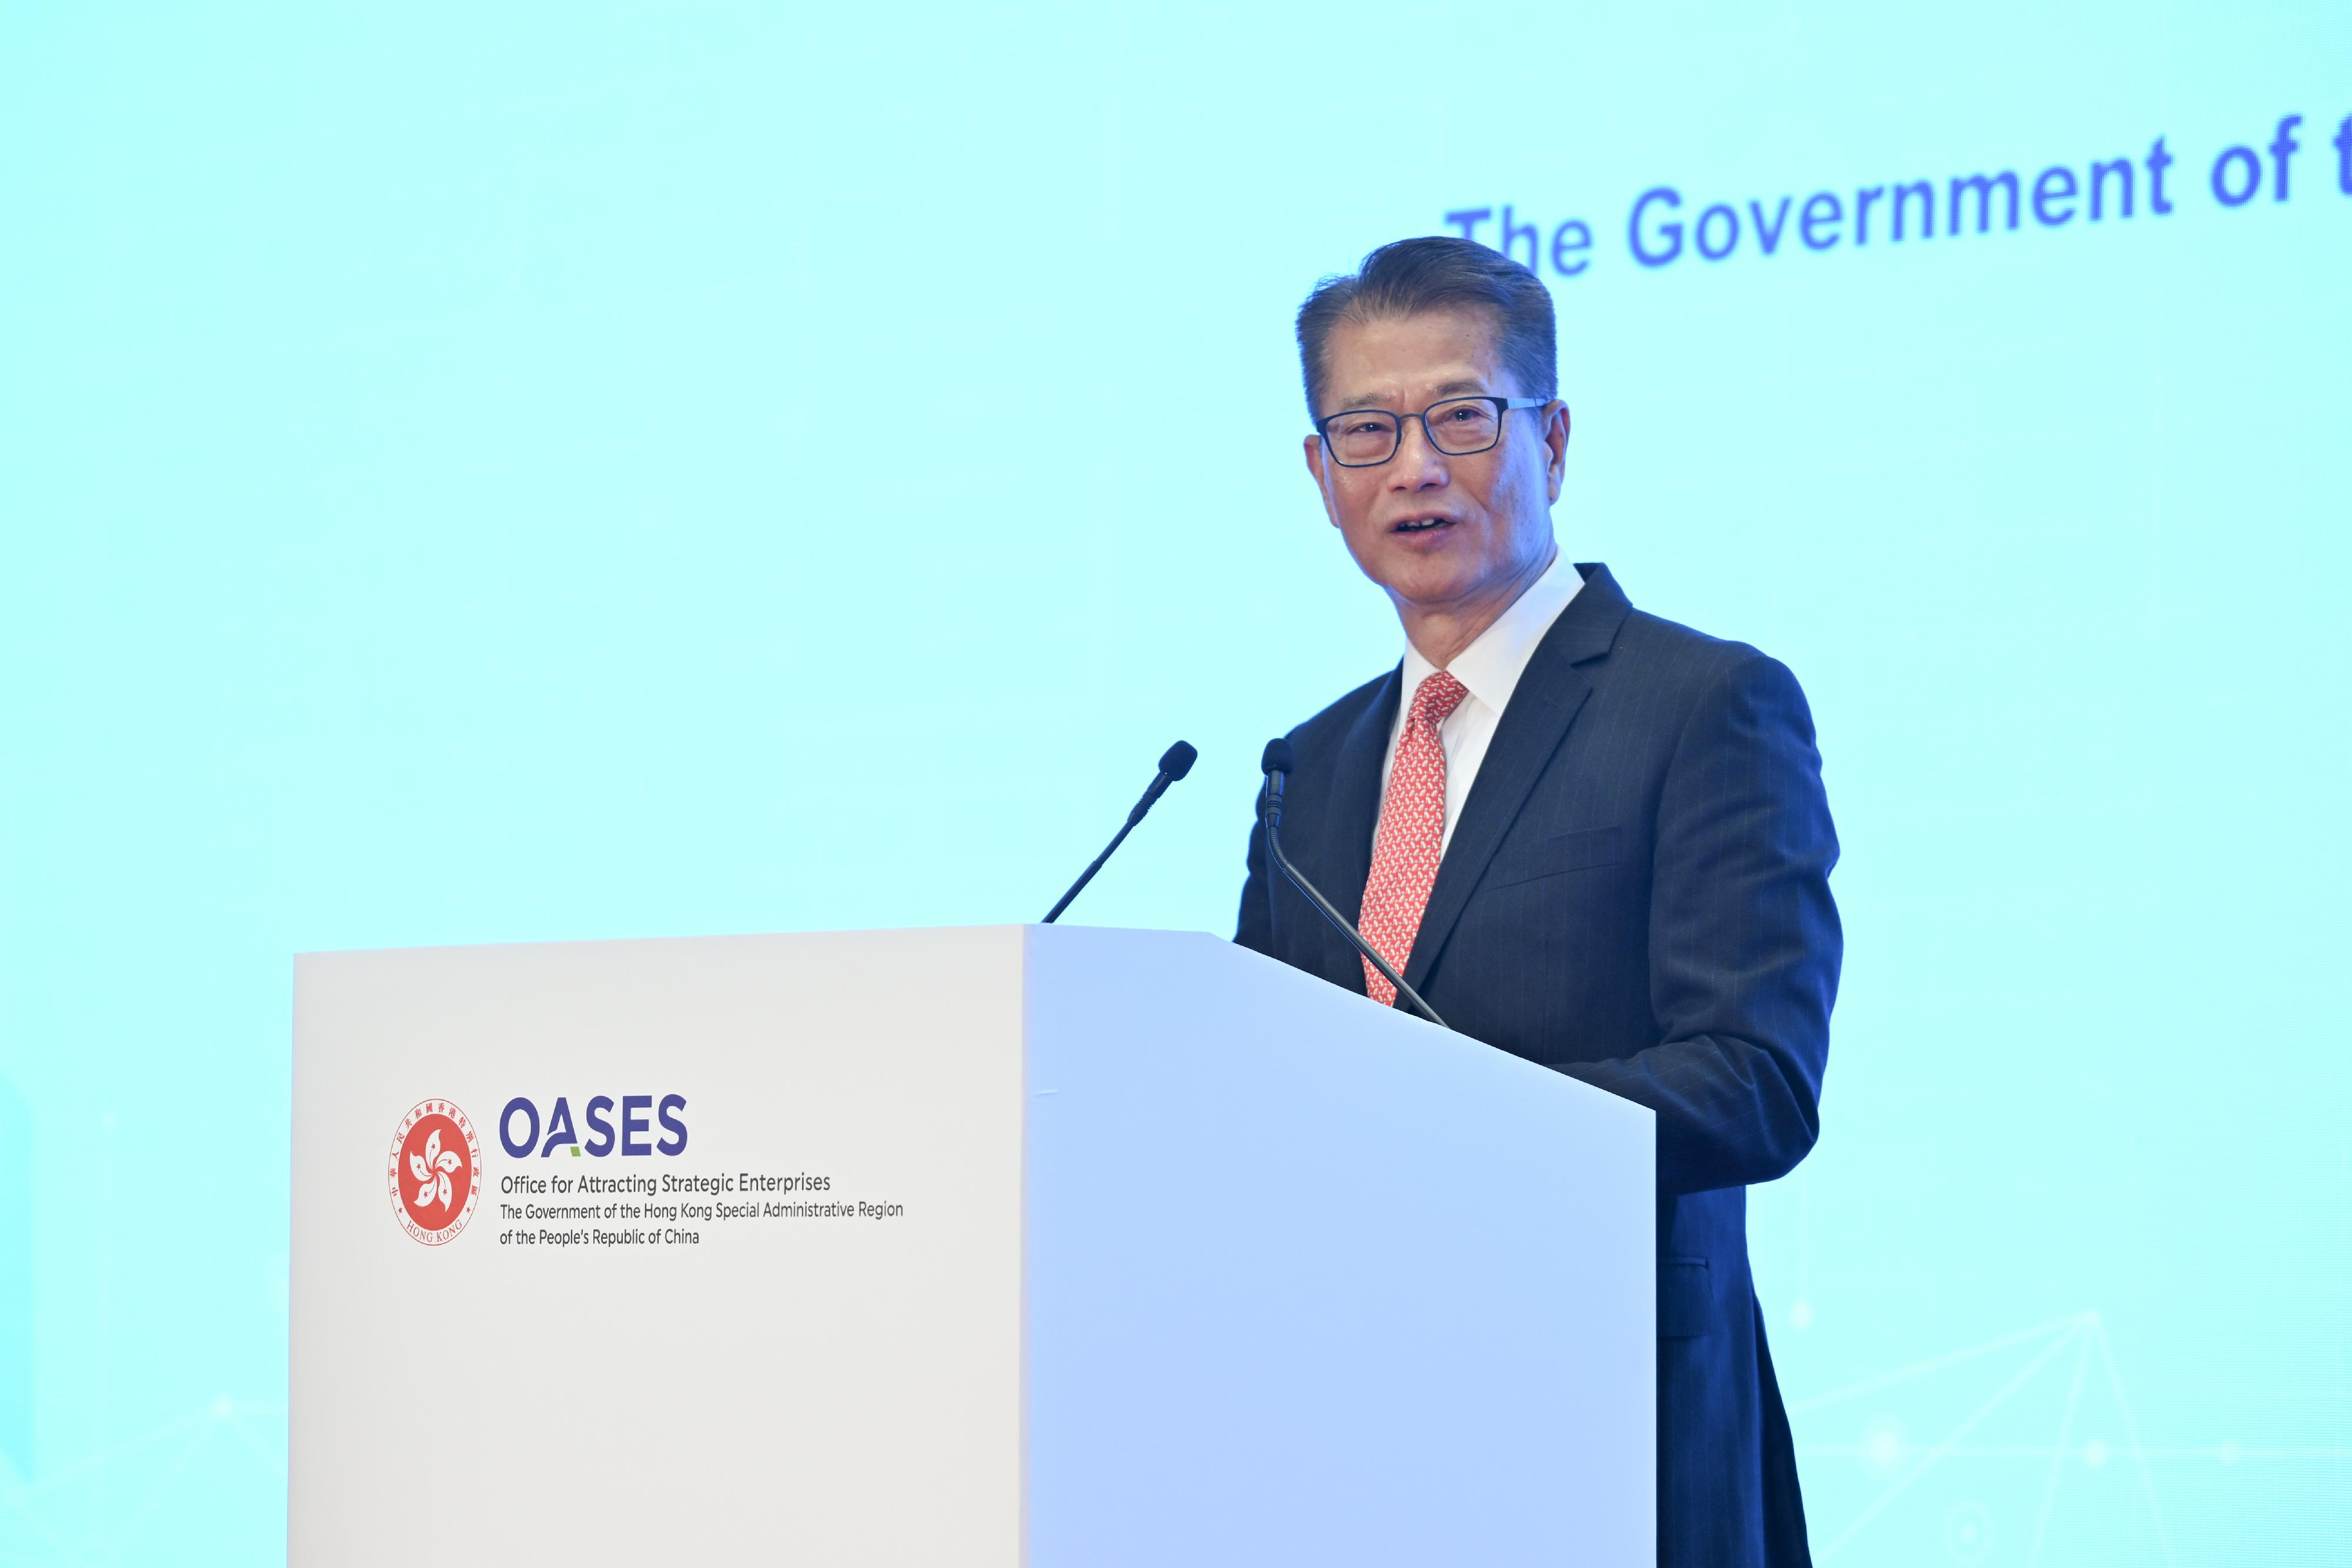 The Financial Secretary, Mr Paul Chan, speaks at the OASES Partnership Signing Ceremony held by the Office for Attracting Strategic Enterprises today (March 20).